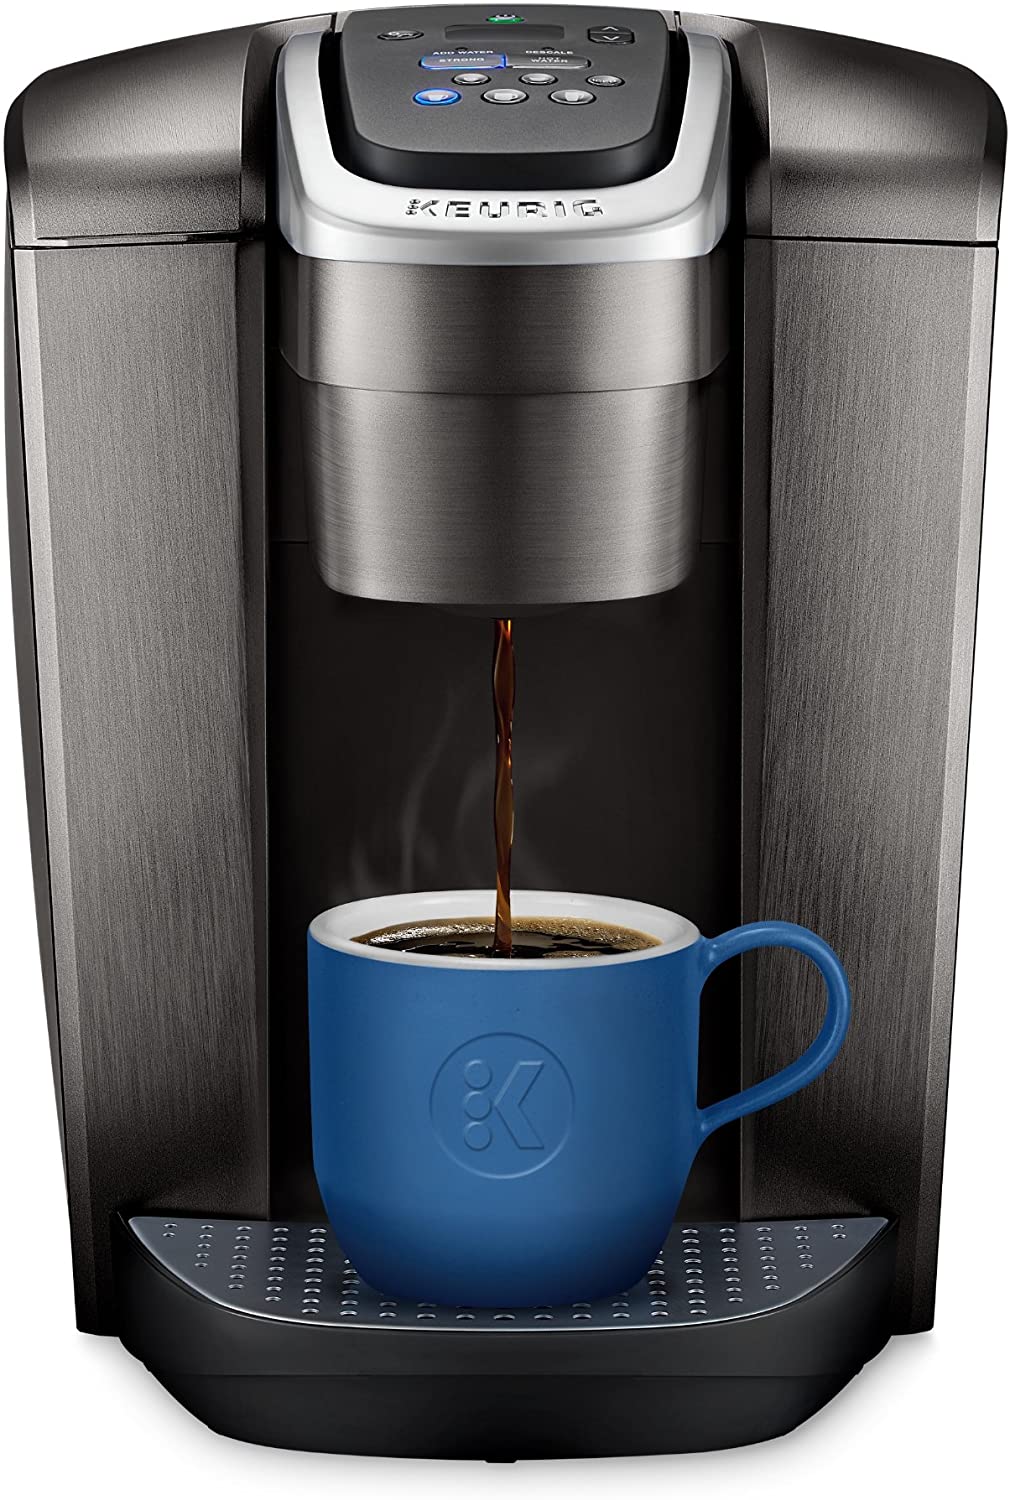 Best Coffee Maker: How to Choose the Machine That’s Right for You